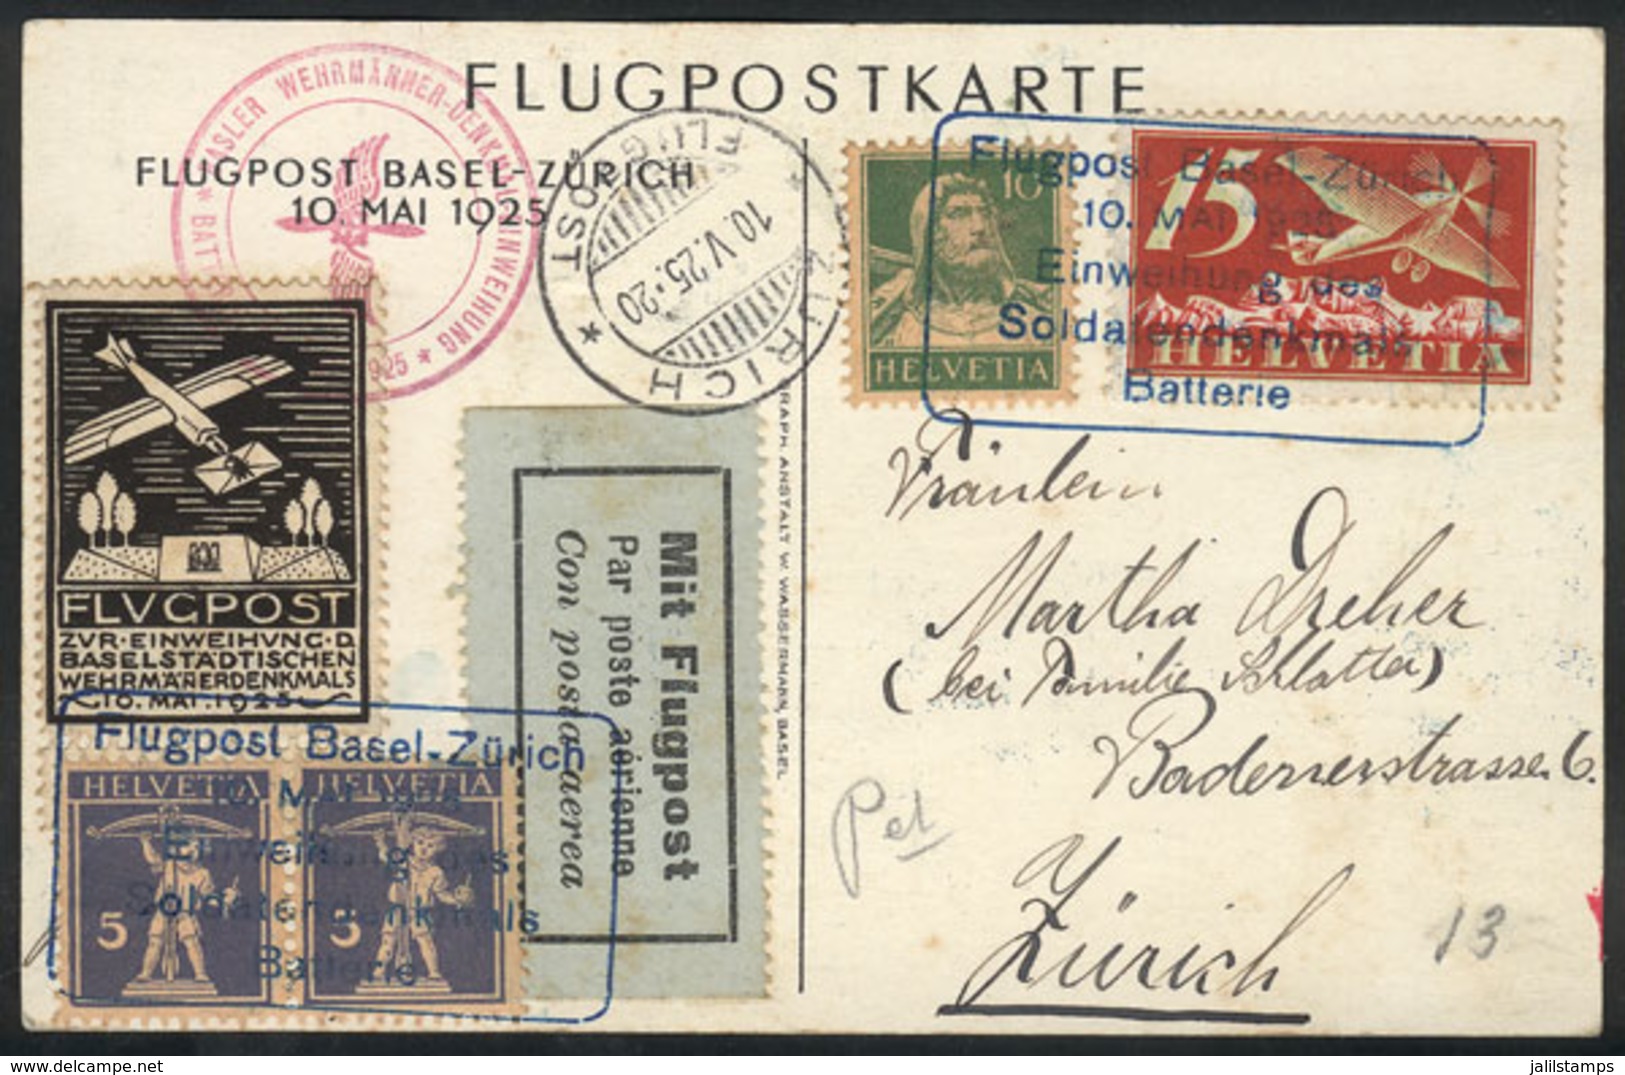 872 SWITZERLAND: 10/MAY/1925 Flight Basel - Zürich, Postcard With Cinderella And Special Cancels, VF Quality! - ...-1845 Voorlopers